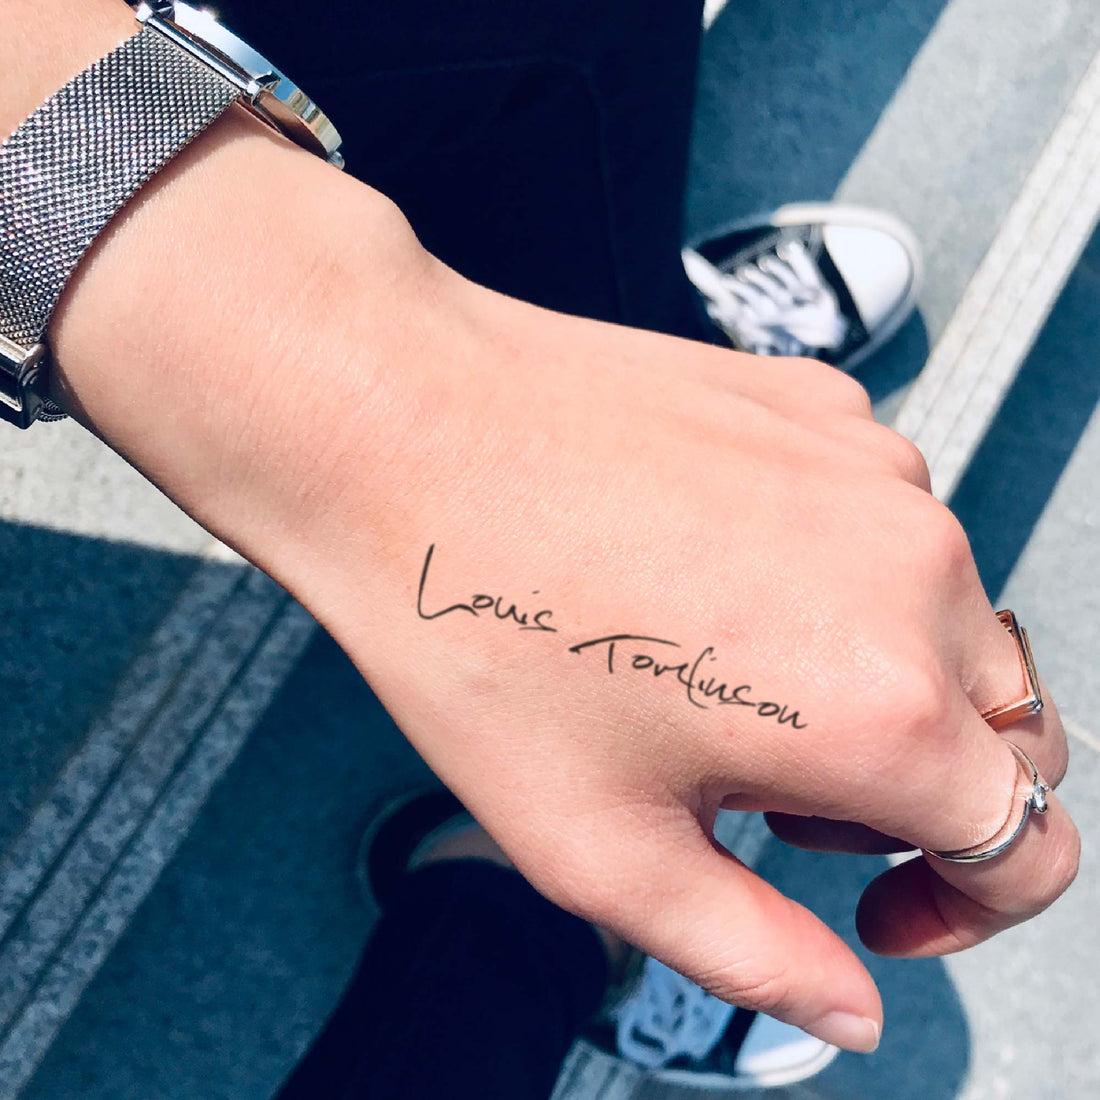 Louis Tomlinson custom temporary tattoo sticker design idea inspiration meanings removal arm wrist hand words font name signature calligraphy lyrics tour concert outfits merch accessory gift souvenir costumes wear dress up code